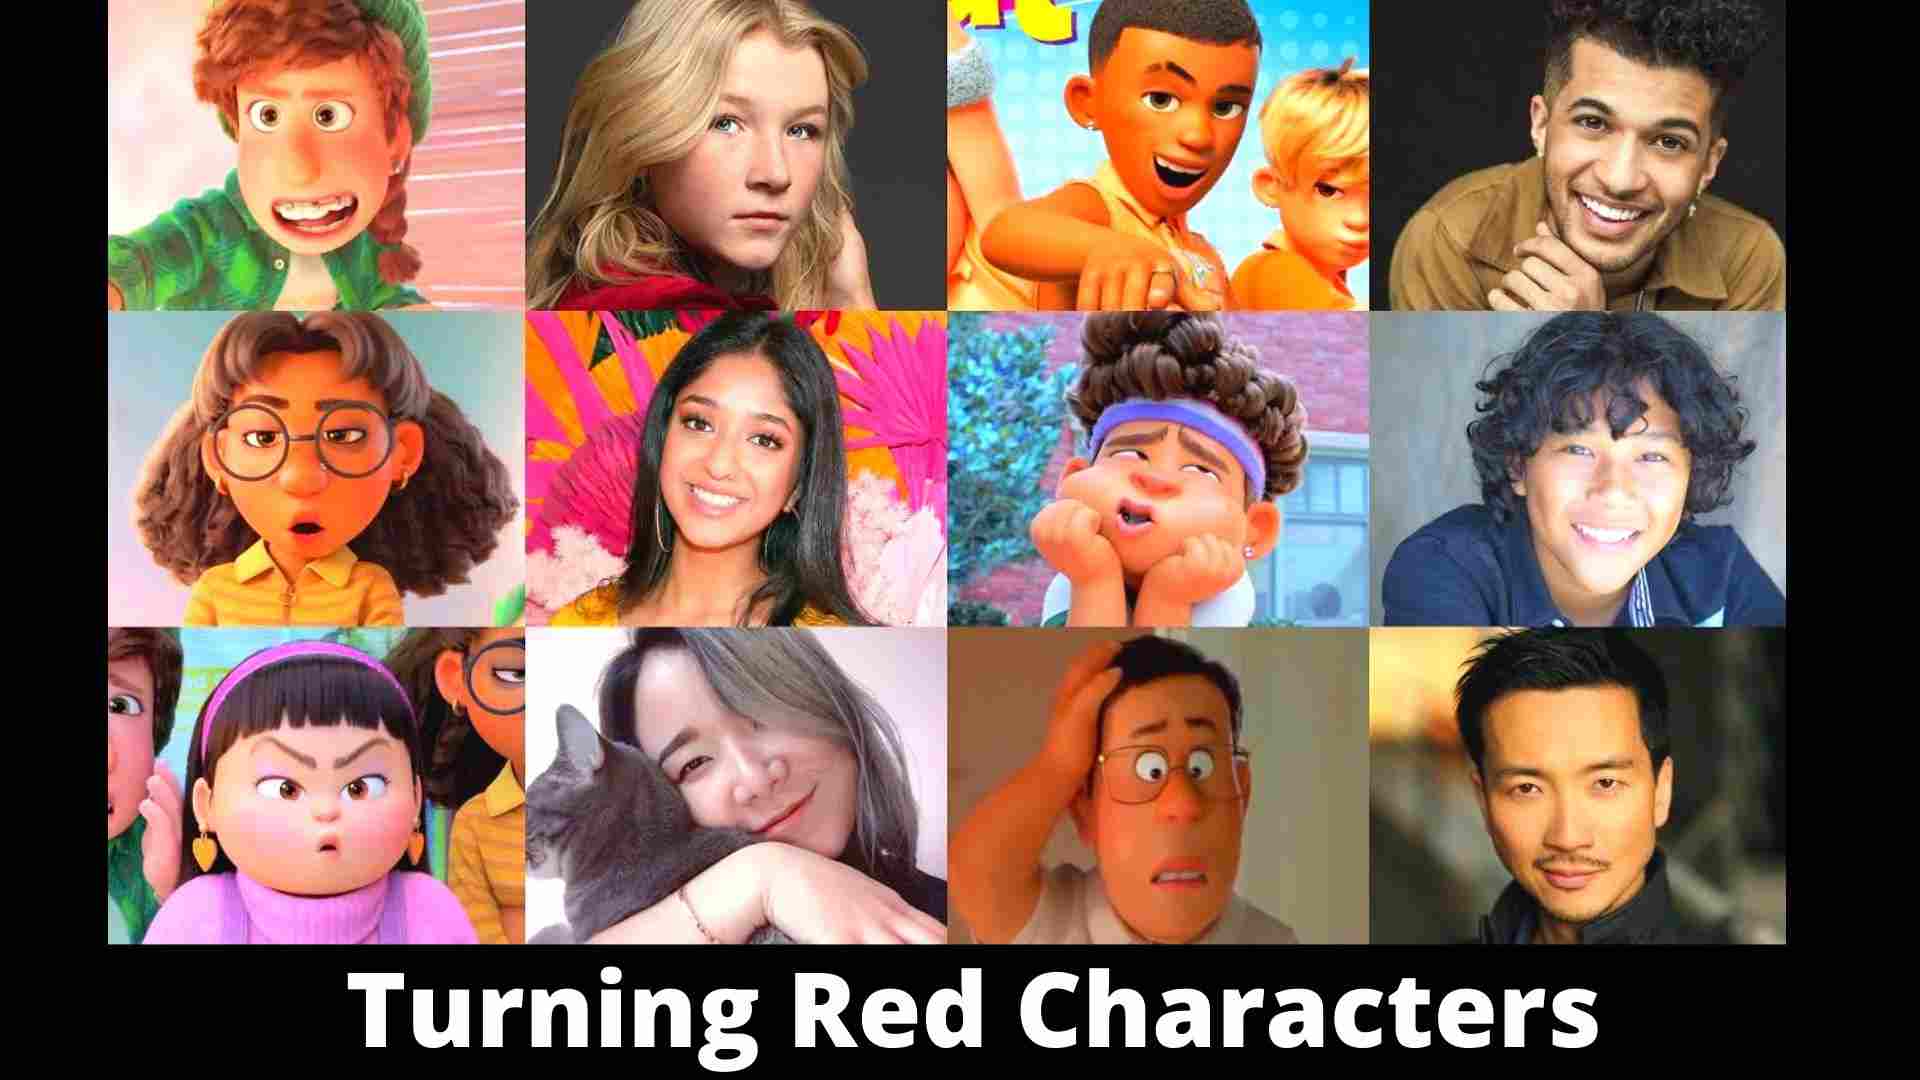 What Turning Red Character are you? Wallpaper and images